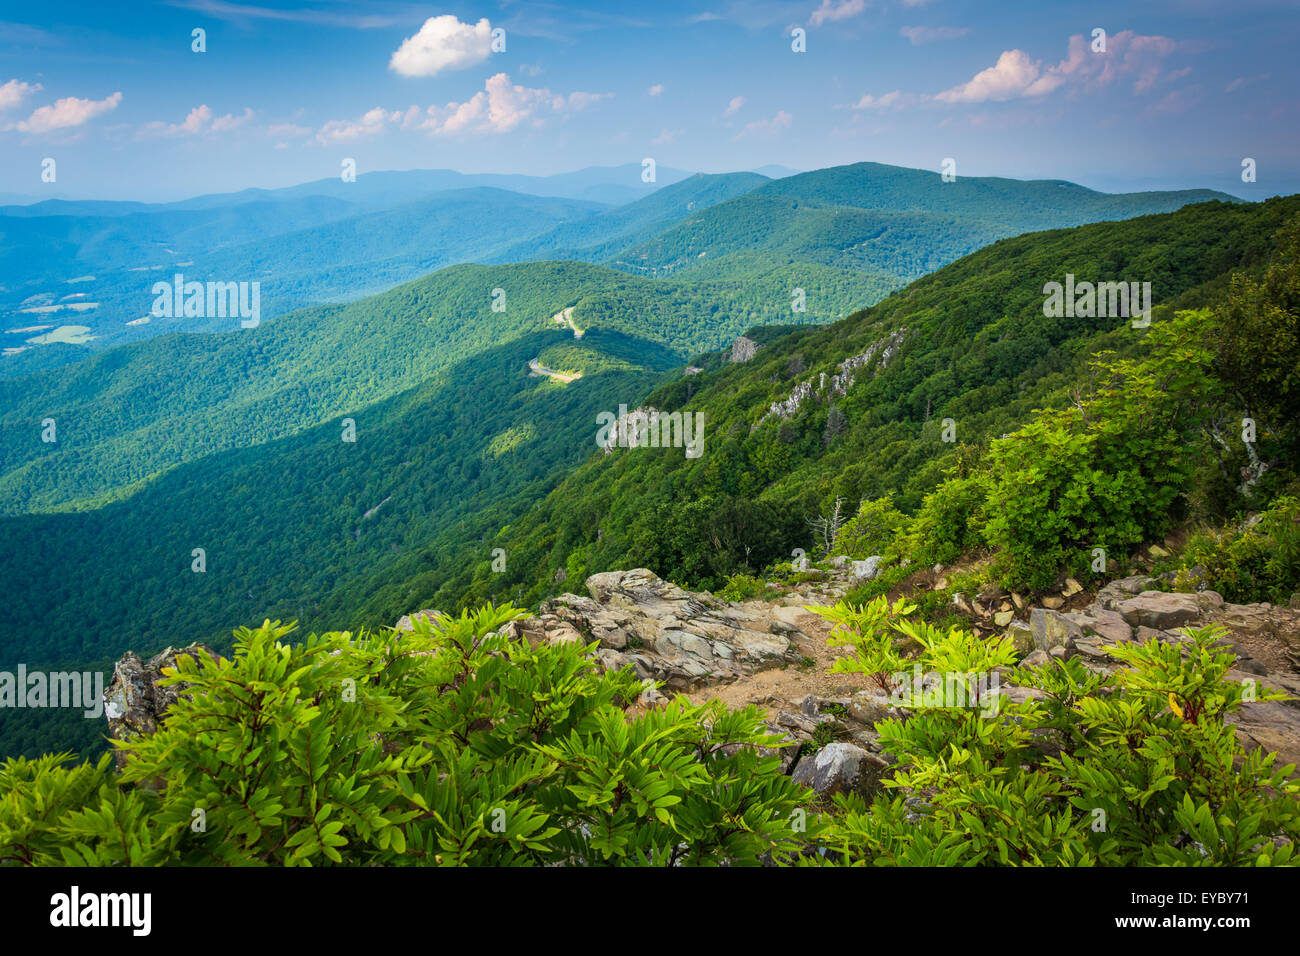 View of the Blue Ridge Mountains from Stony Man Mountain in Shenandoah National Park, Virginia. Stock Photo